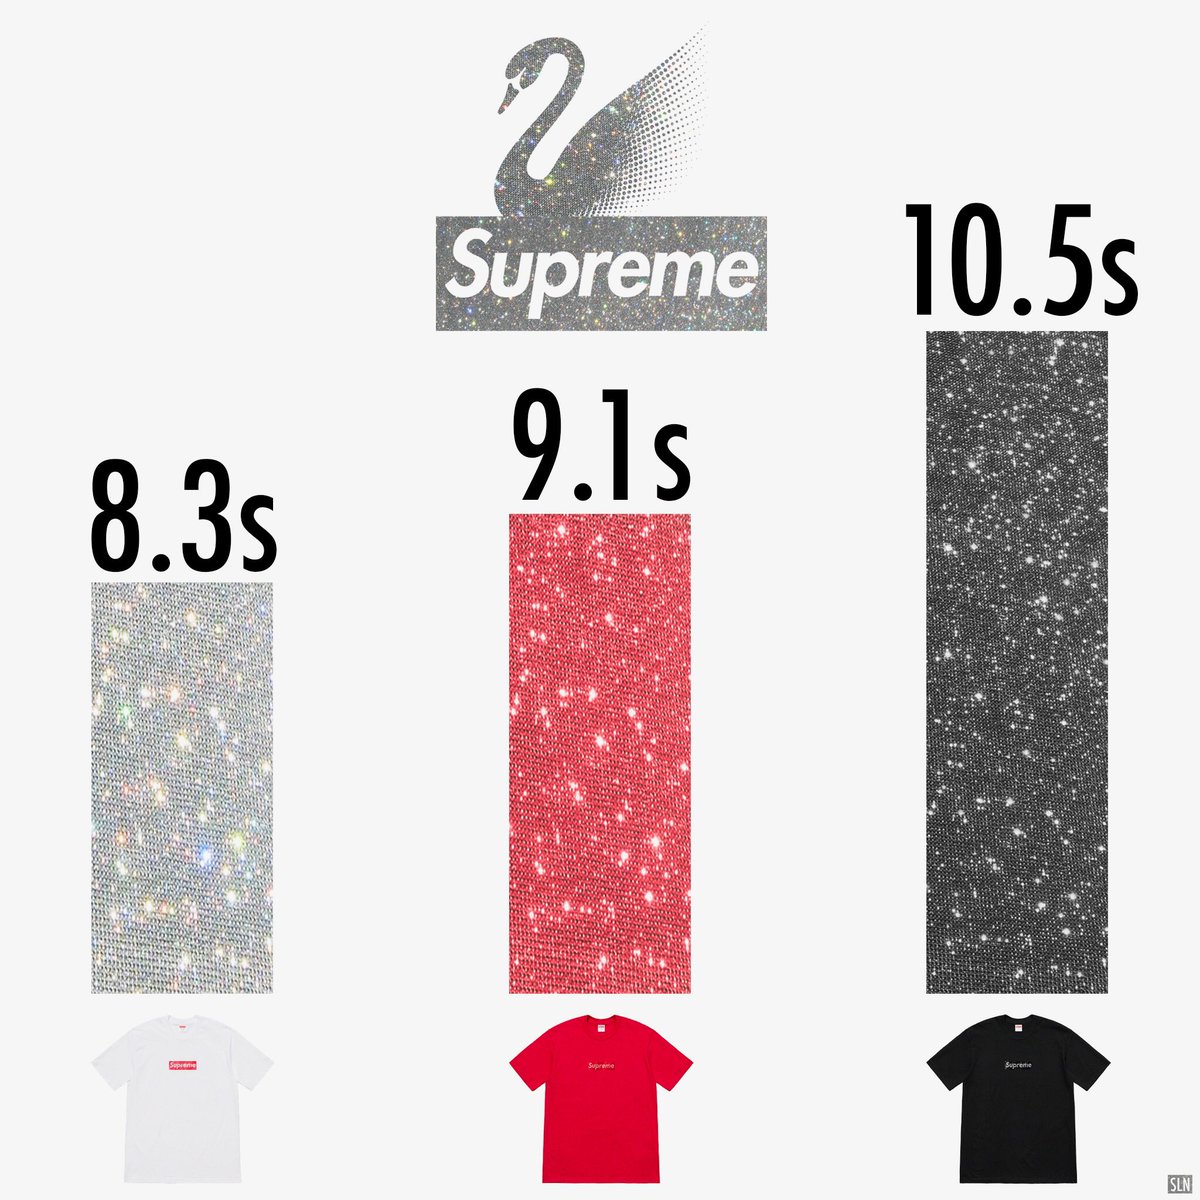 Supreme Leaks News on Twitter: "These are the sellout times for Supreme x Swarovski collection (EU drop) Quantities are limited / Twitter